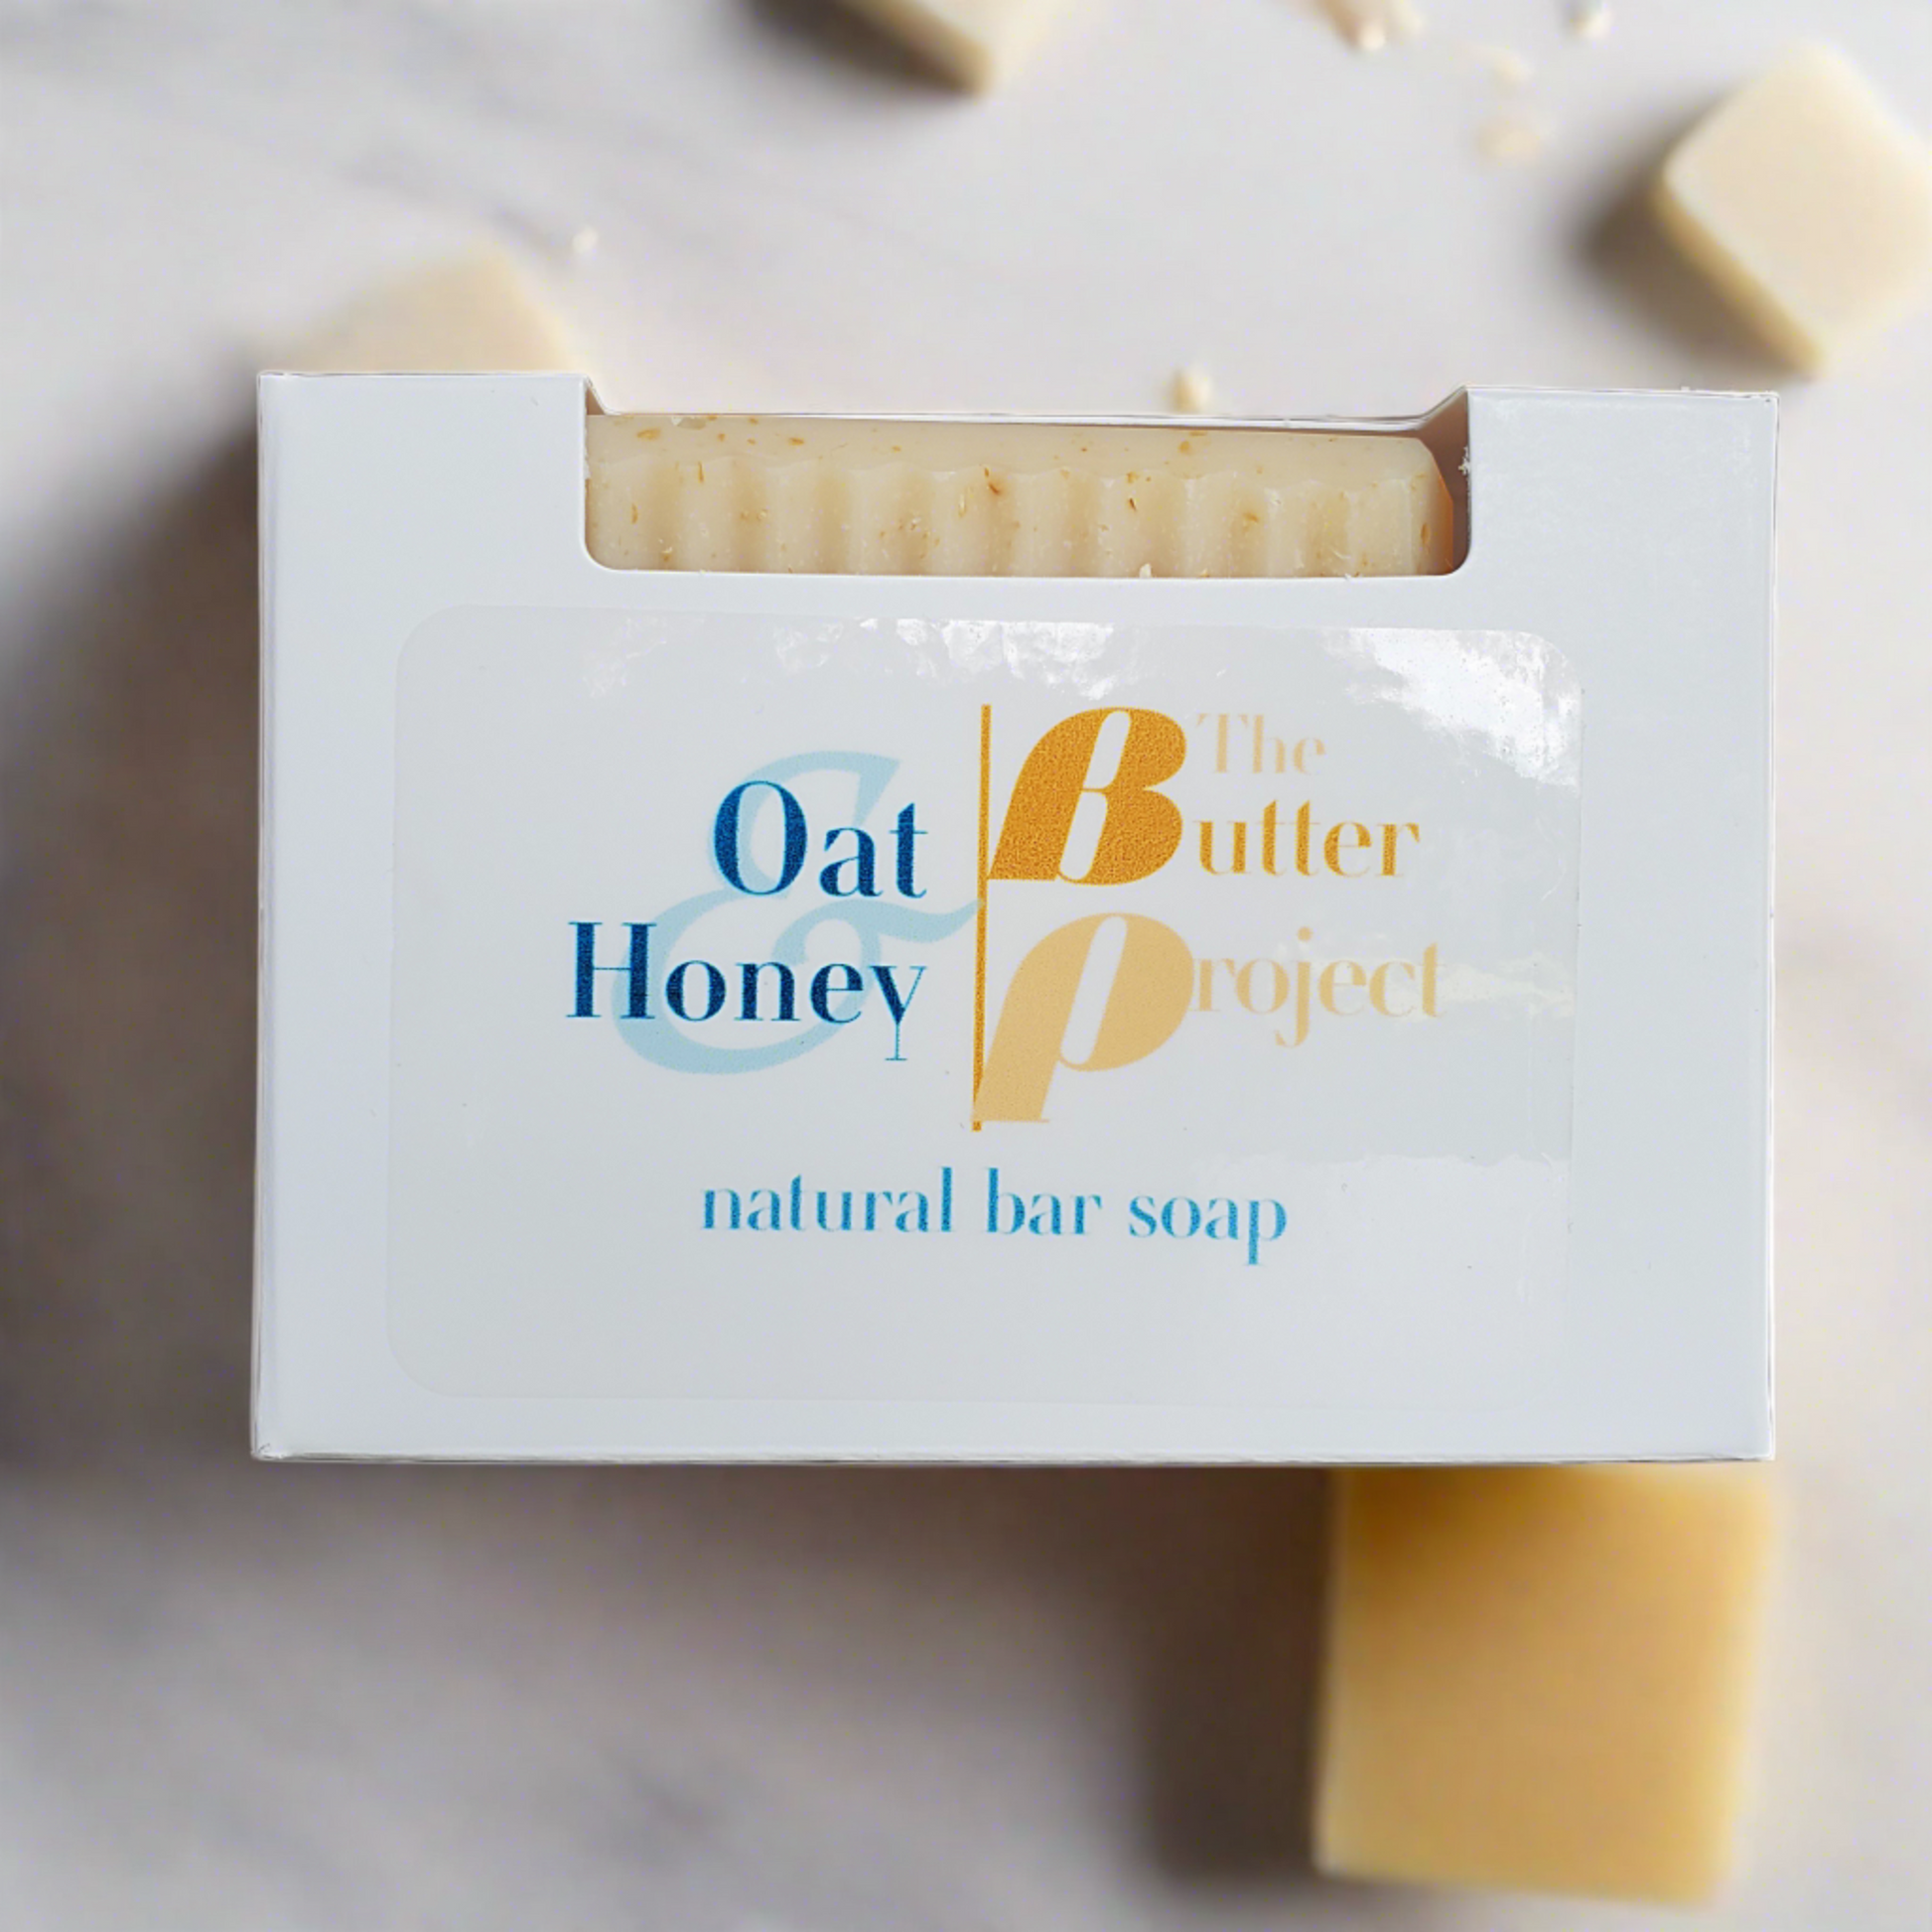 Image of Oat & Honey Natural Bar Soap box from The Butter Project.